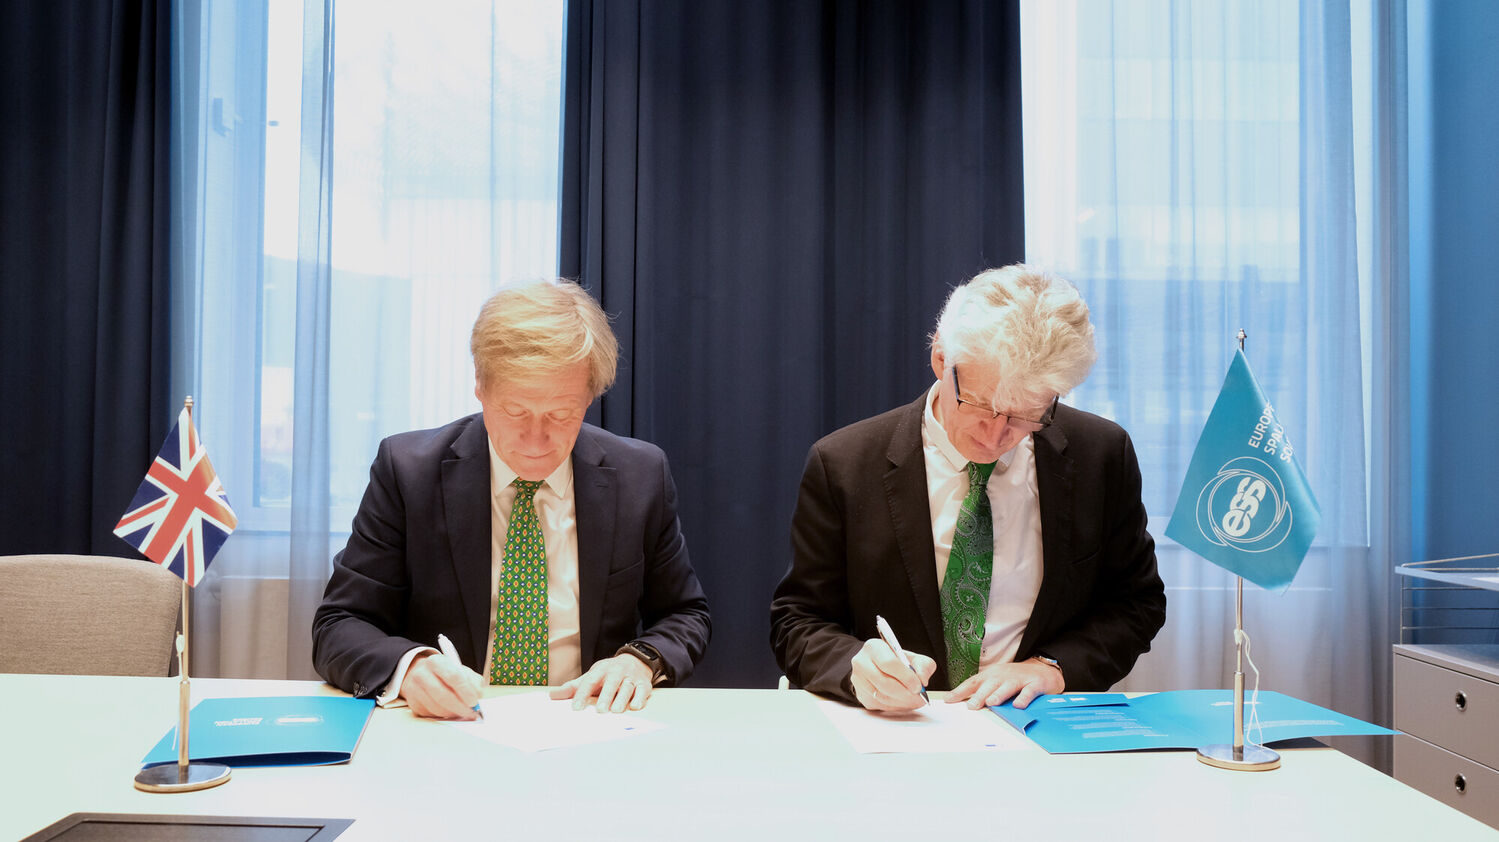 Two men in suits sit and sign documents with UK and ESS flags